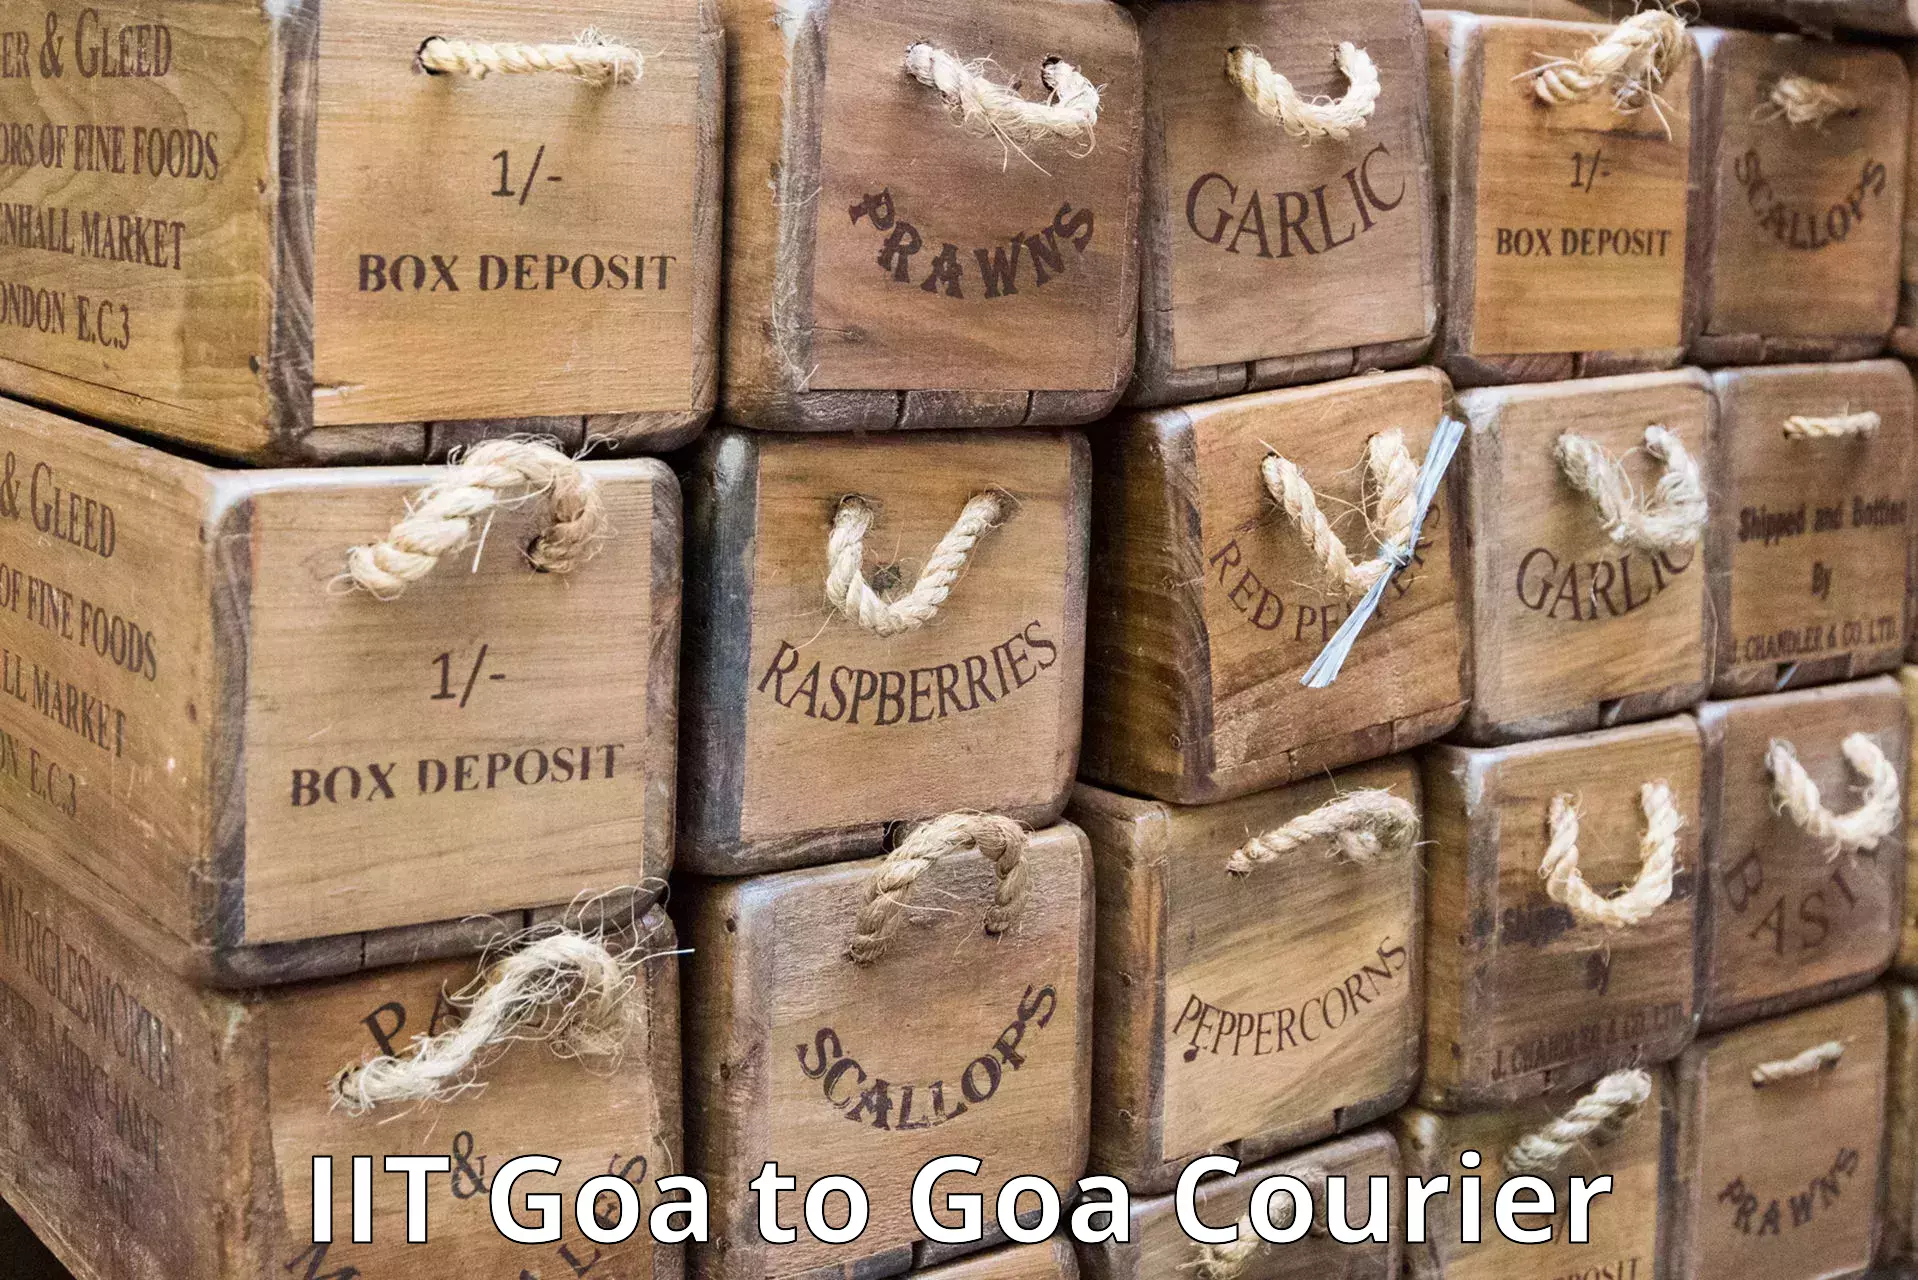 Express delivery capabilities IIT Goa to Margao